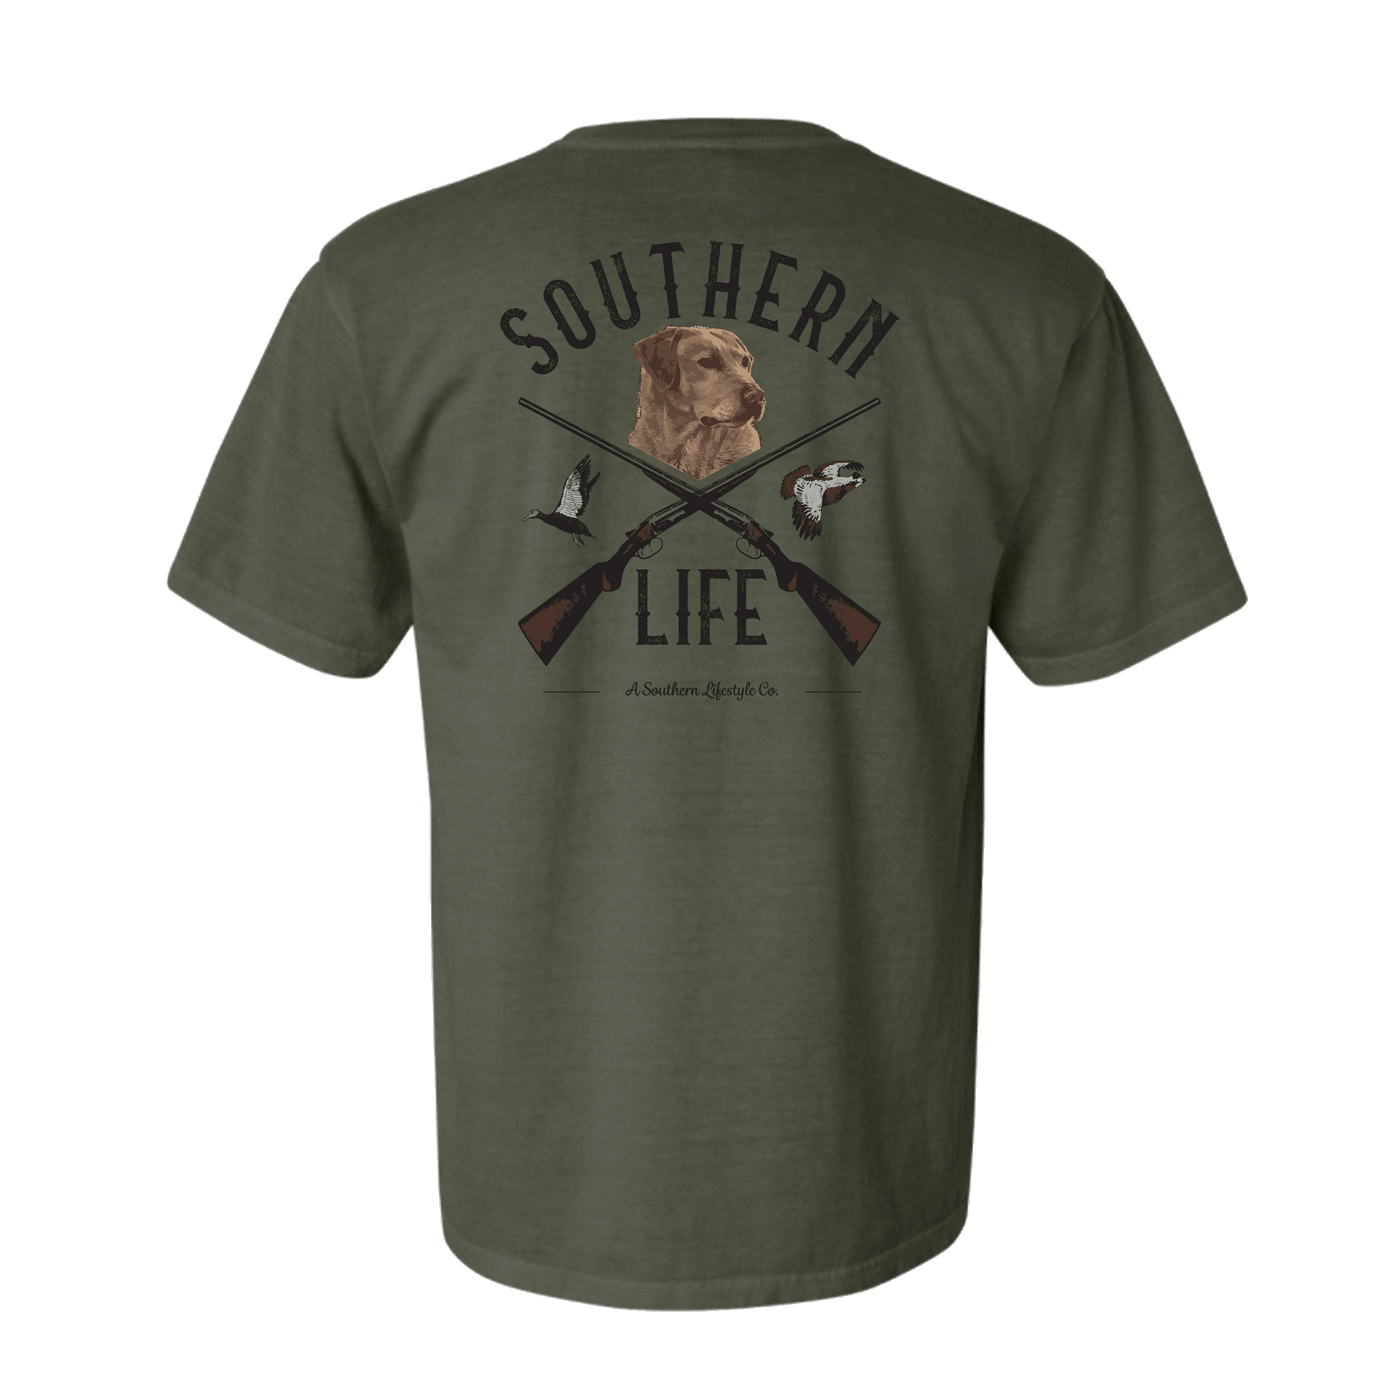 Southern Life Short Sleeve Tee | A Southern Lifestyle Co. | Fruit of the Vine Boutique 